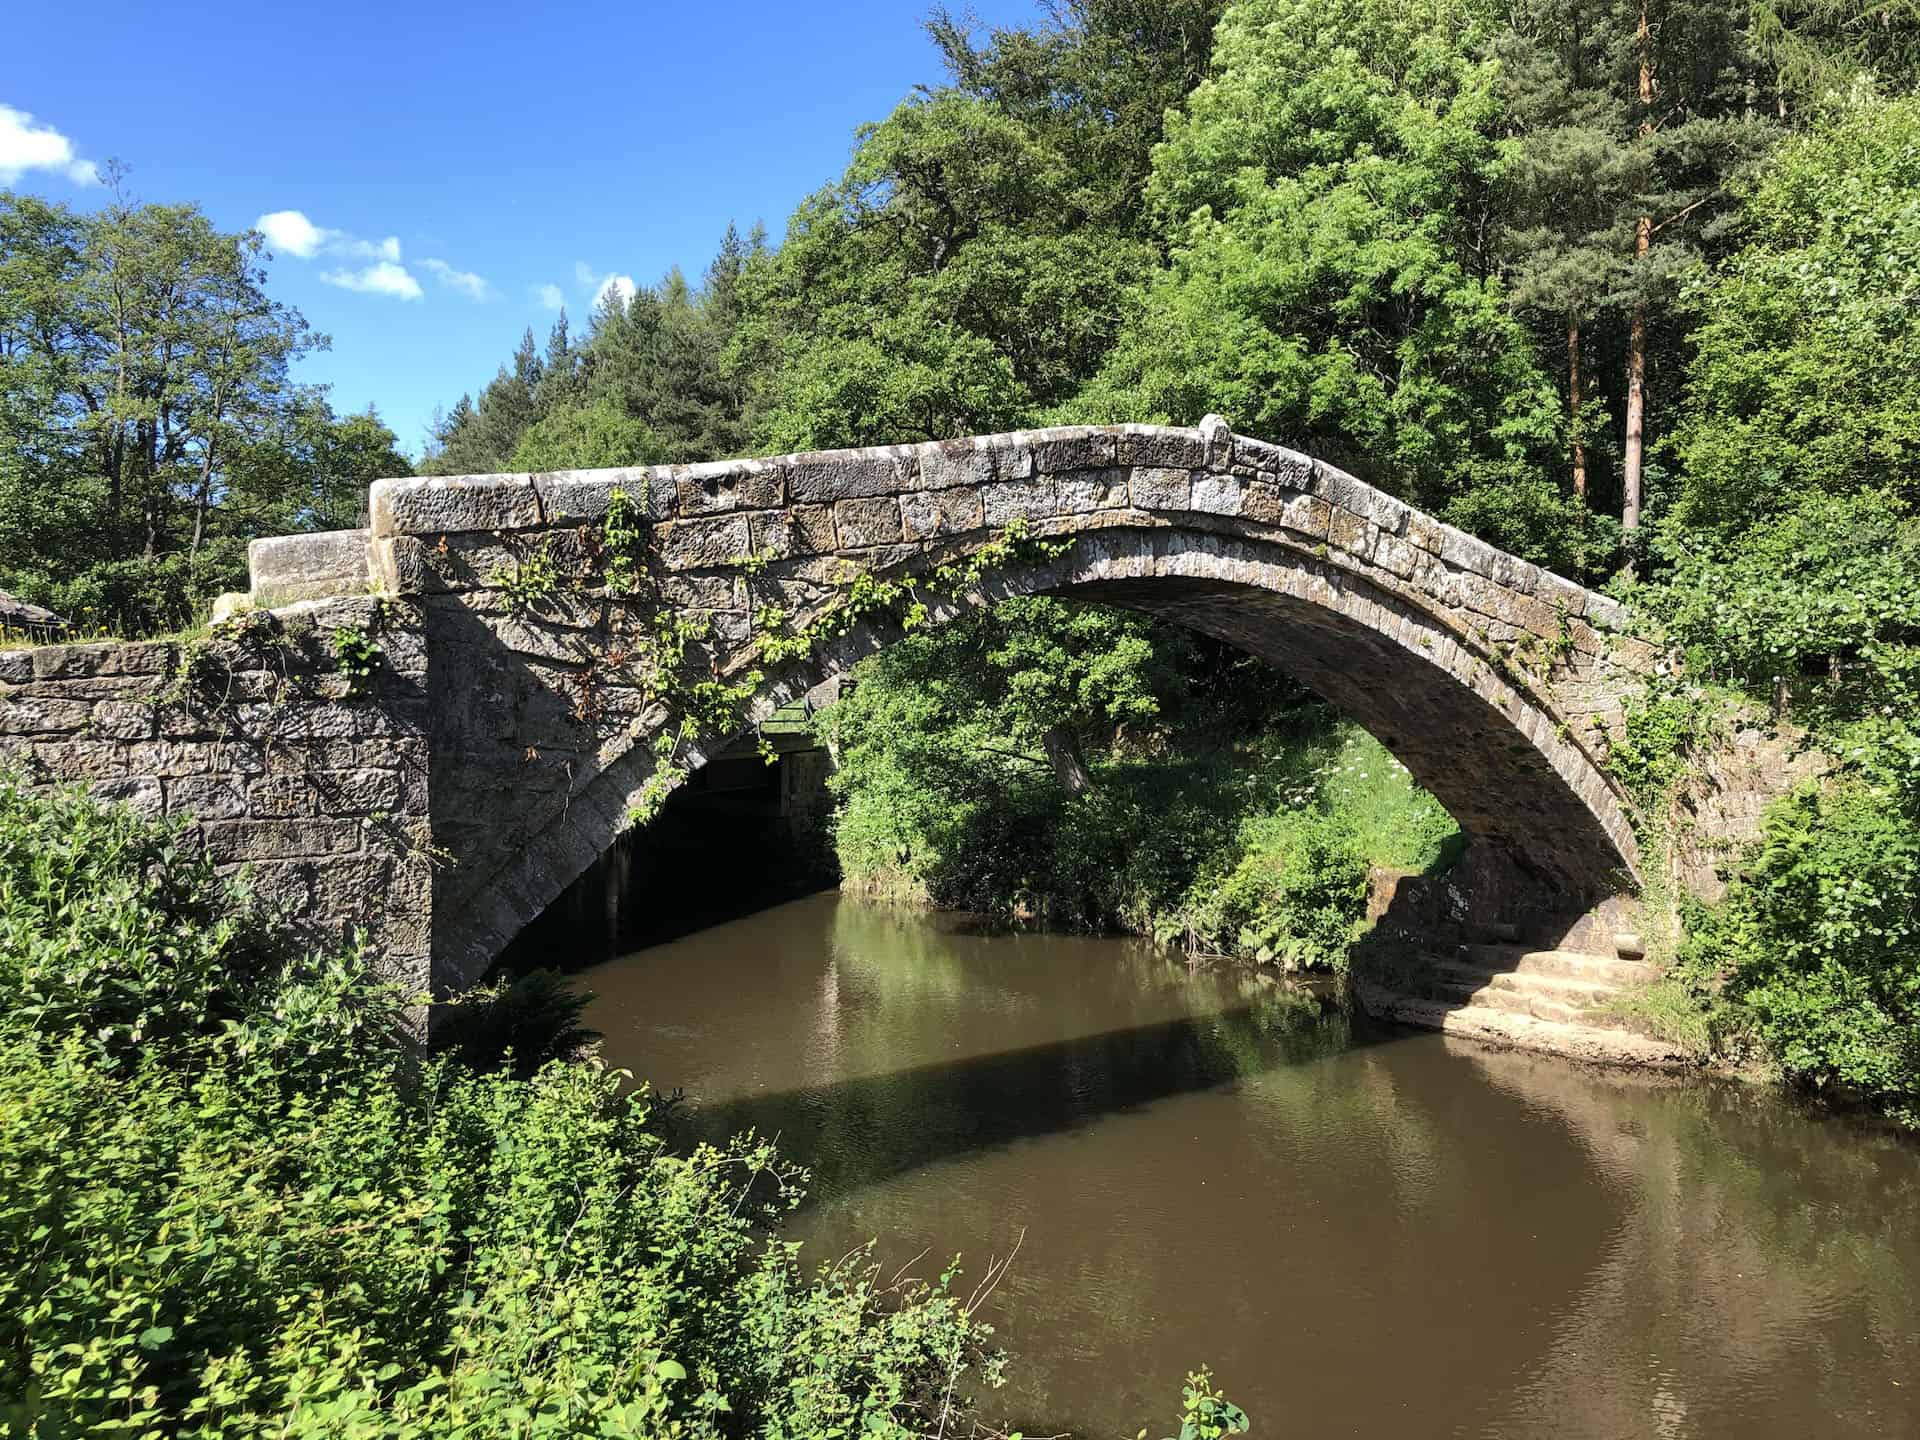 Beggar's Bridge is a survivor from a time when horse-power and walking were the main modes of transport. It is a 'packhorse' bridge, designed with a low parapet to allow horses with fully laden panniers to cross without touching the sides.